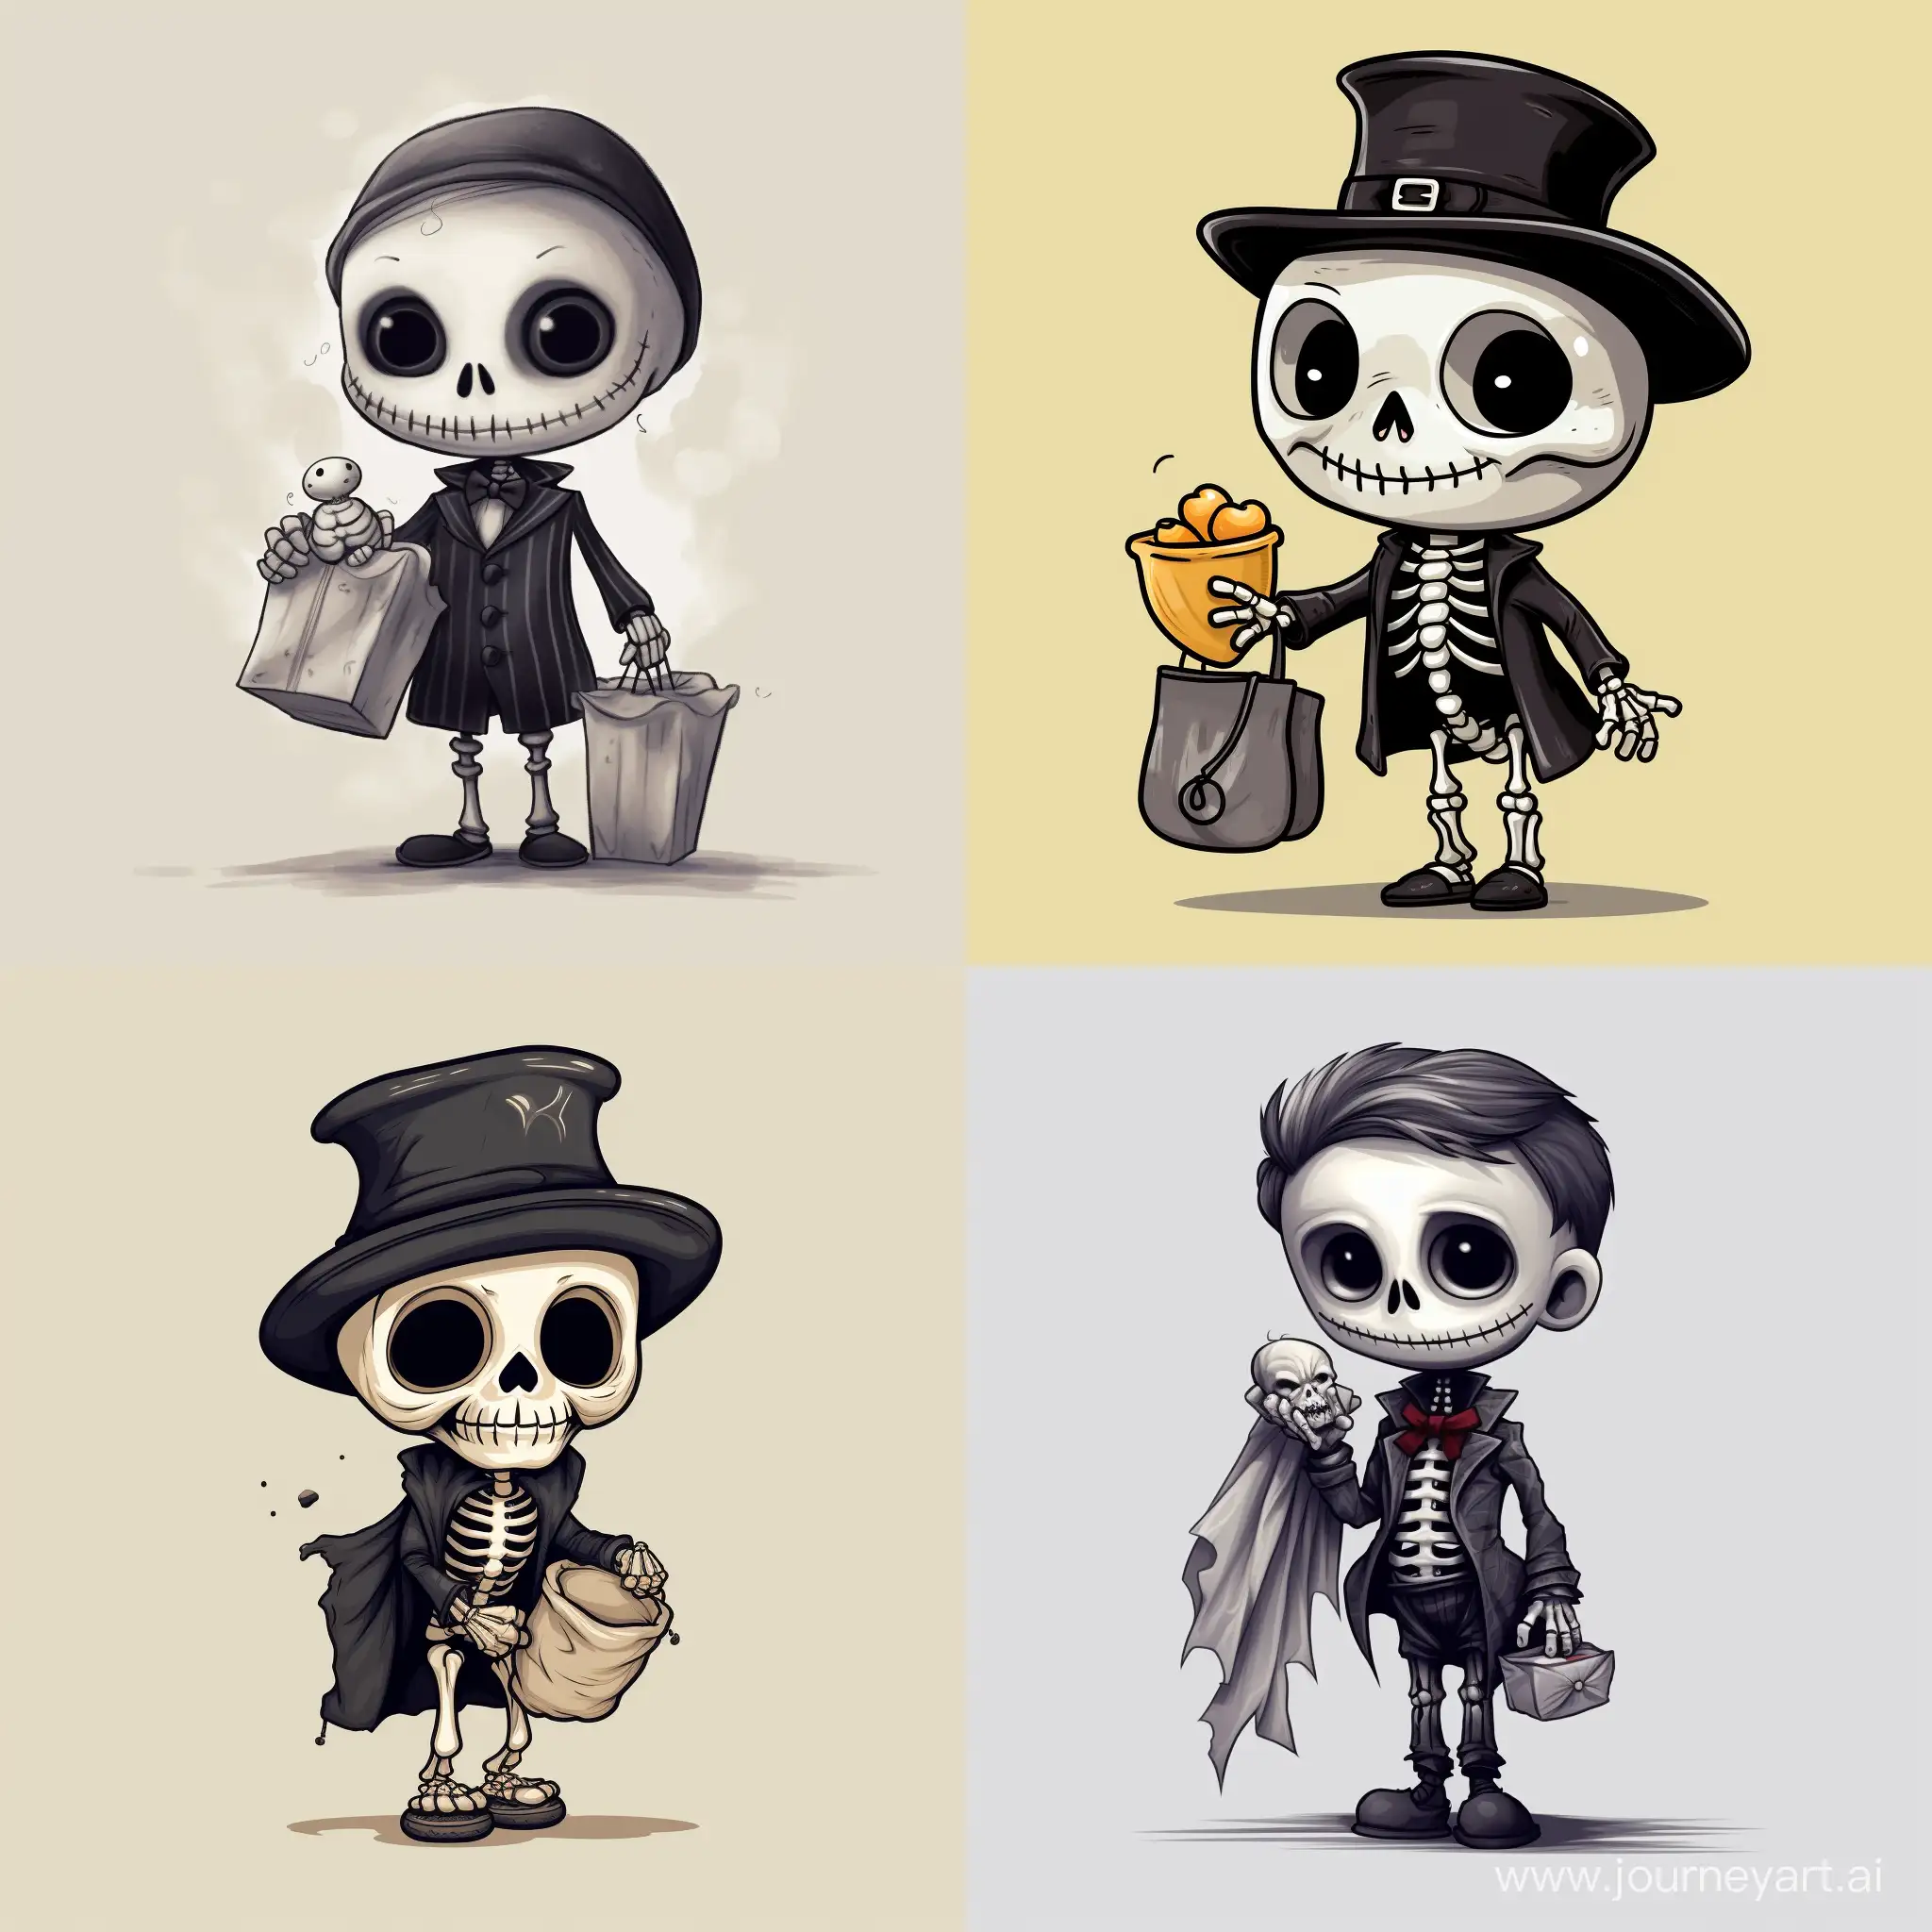 A cute little skeleton holds a bag of money in his hand on a gray background